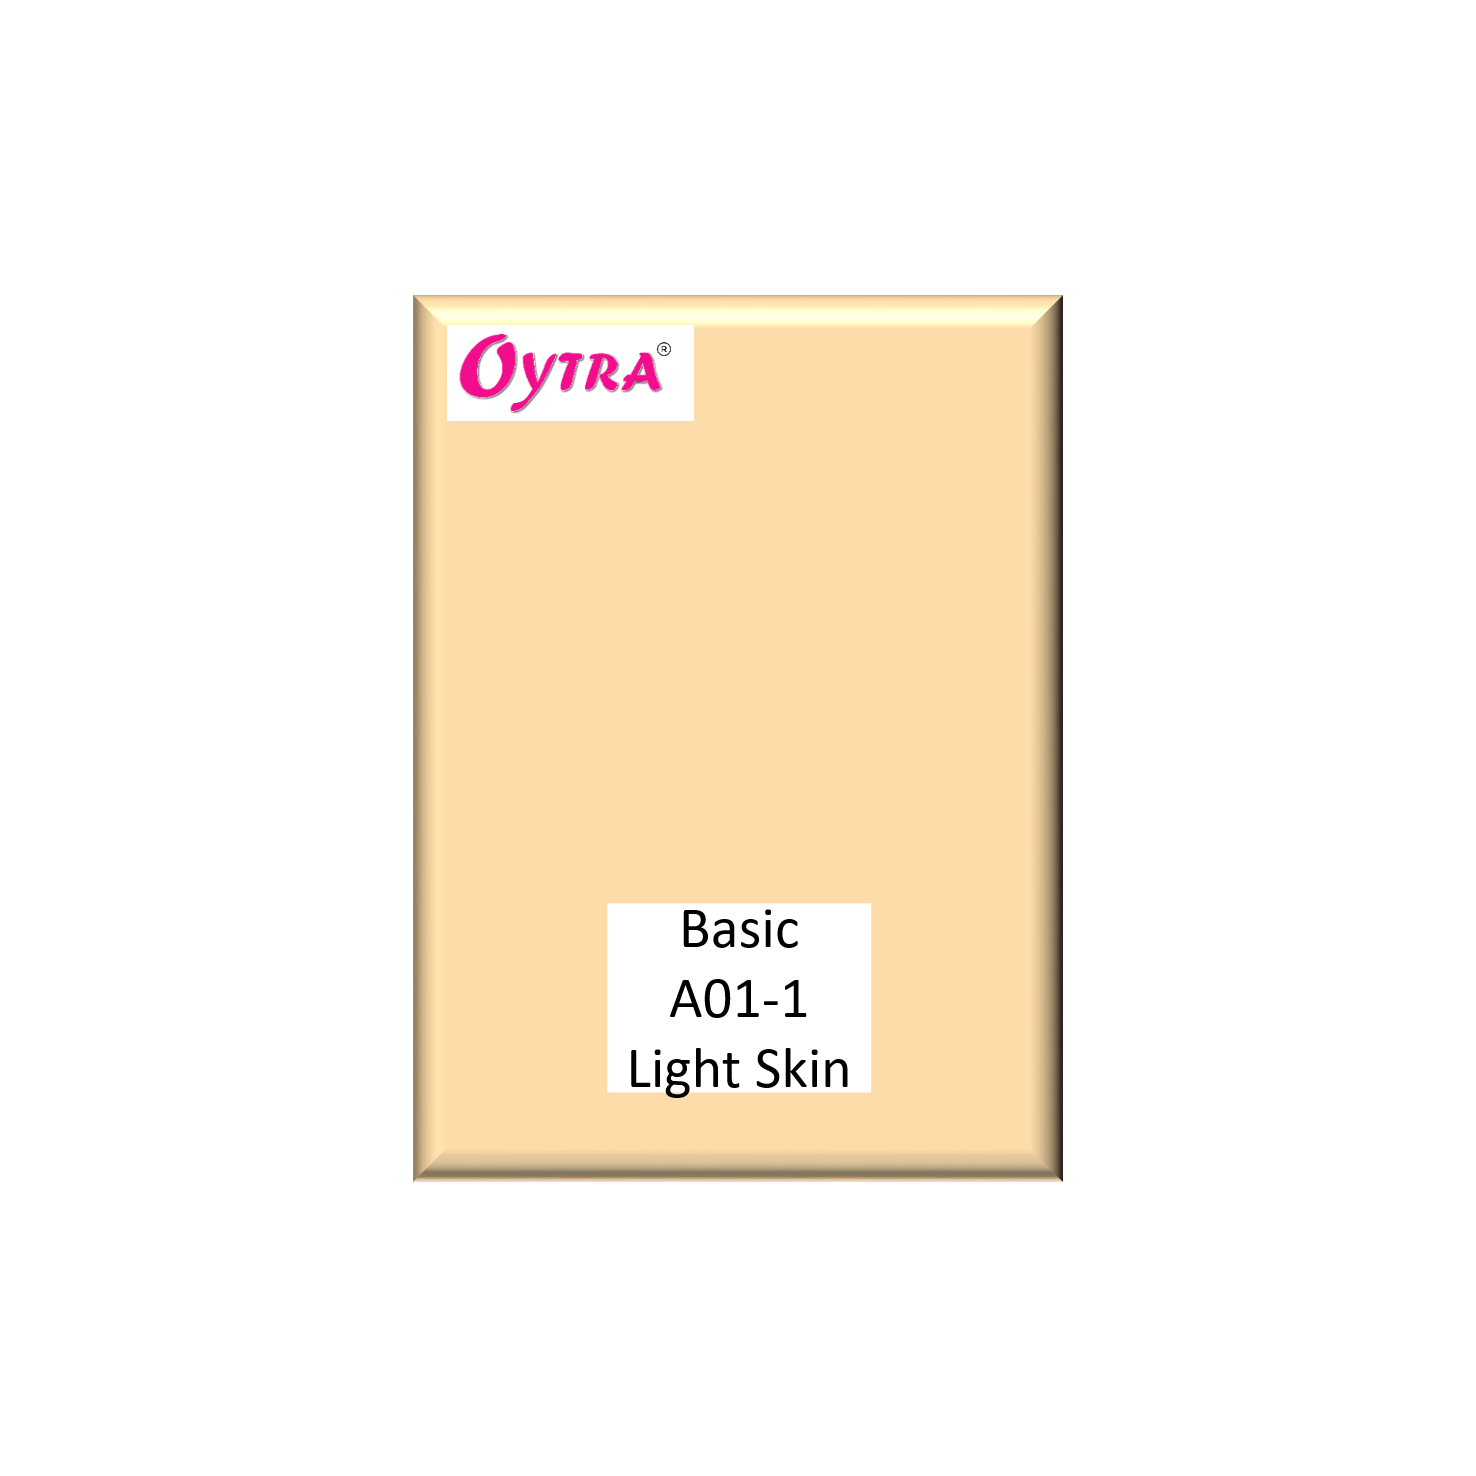 OYTRA 500 Grams Basic Series Polymer Clay for Jewelry Earrings Making -  Oytra